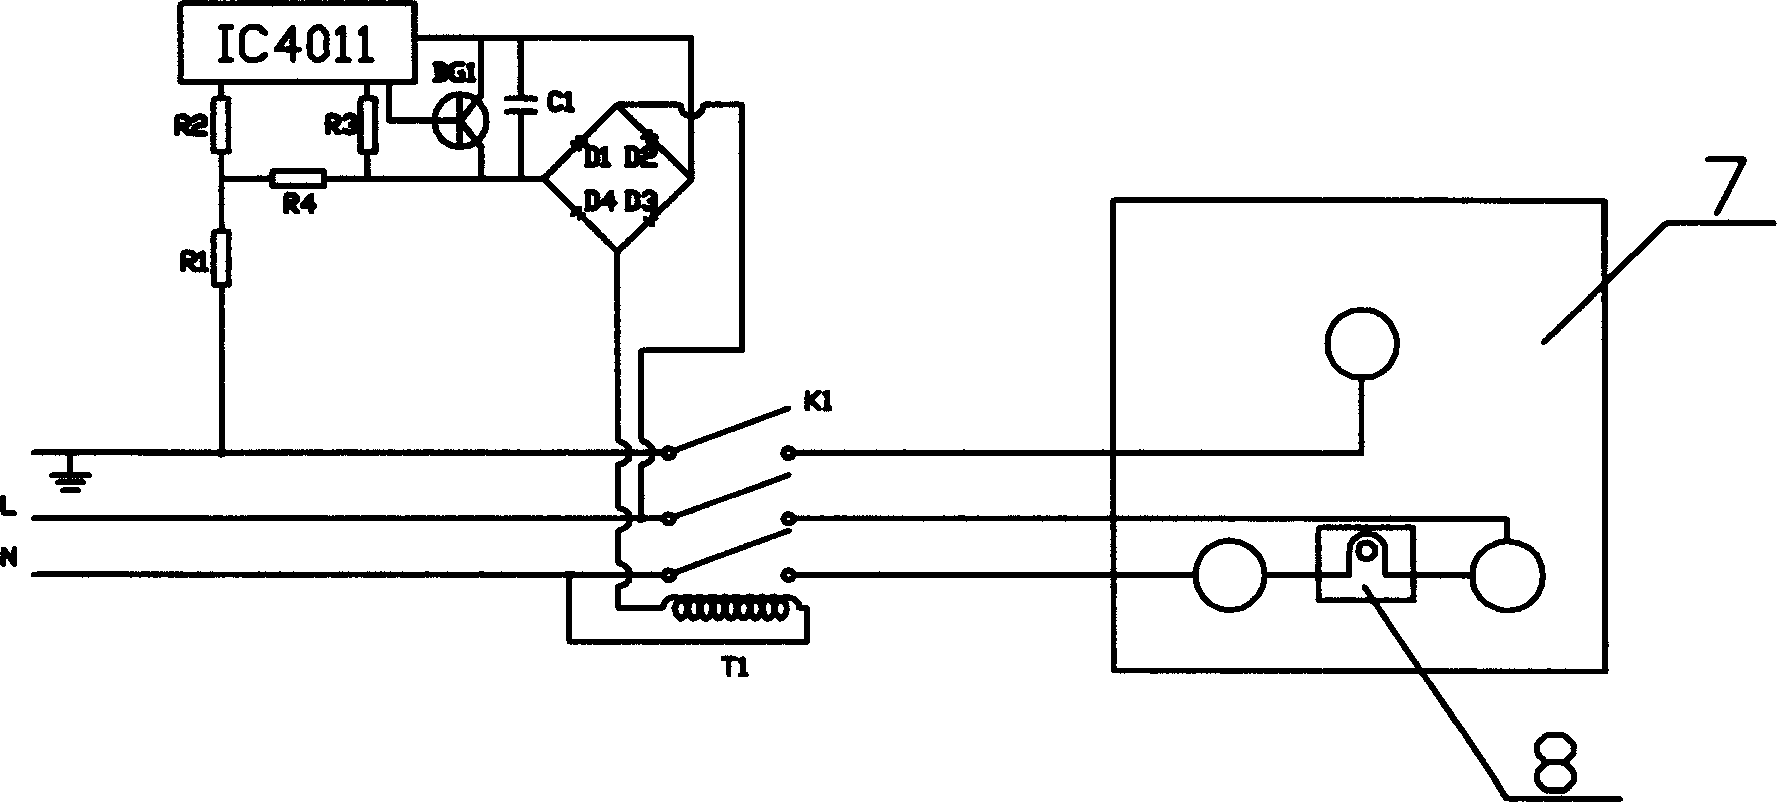 Electric equipment safety device